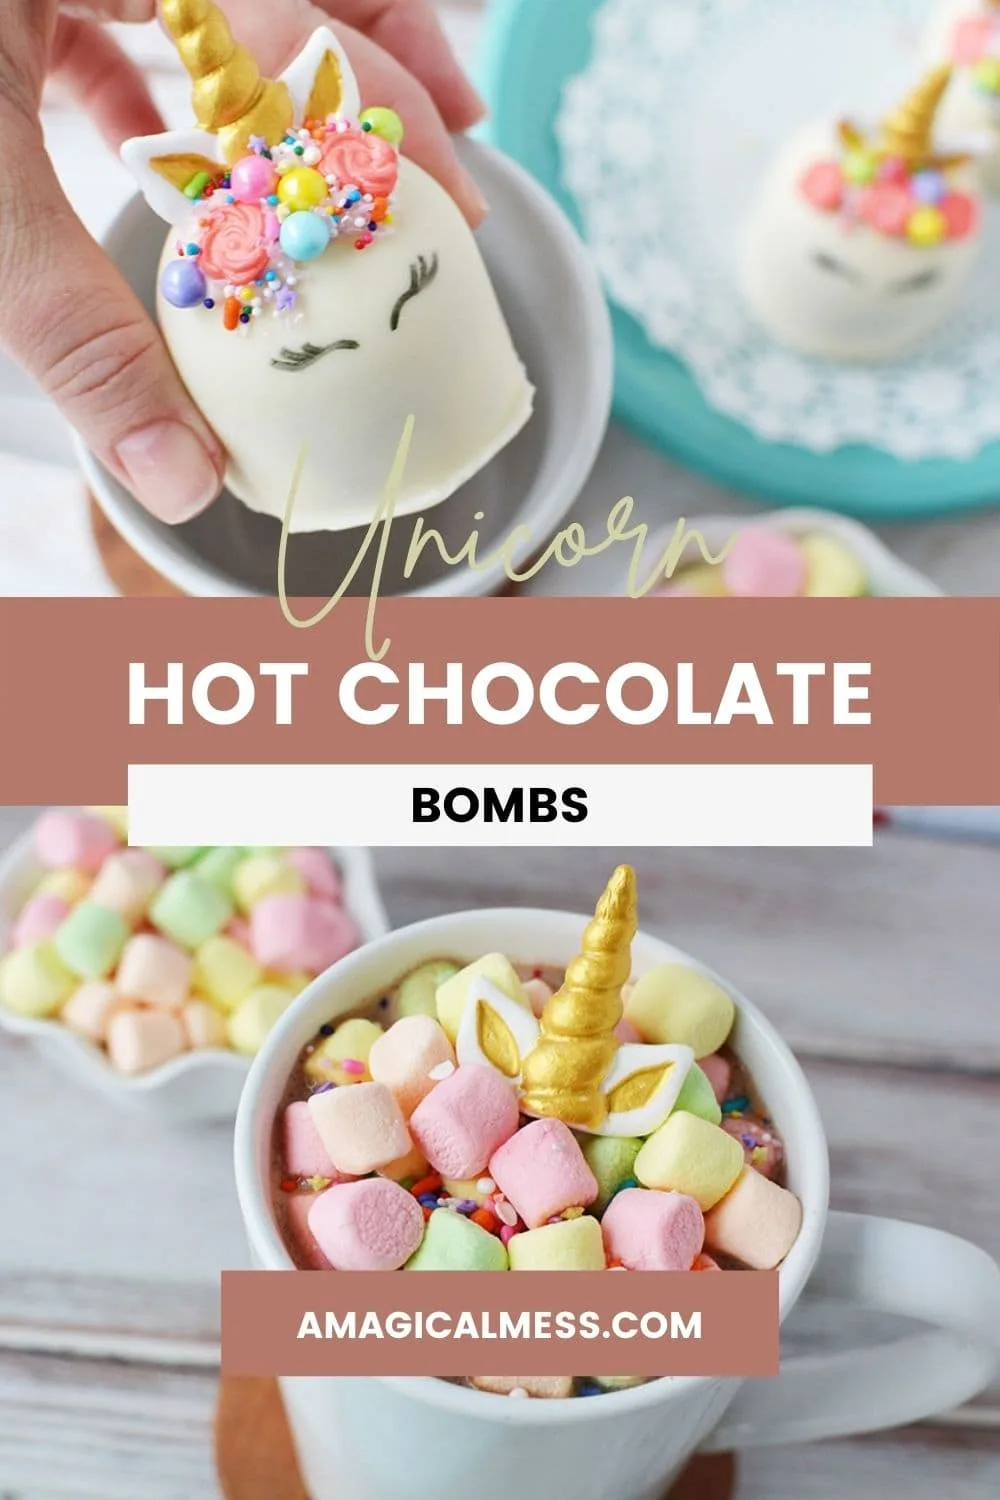 Dropping a unicorn hot chocolate bomb into a mug and finished unicorn hot chocolate in a mug.